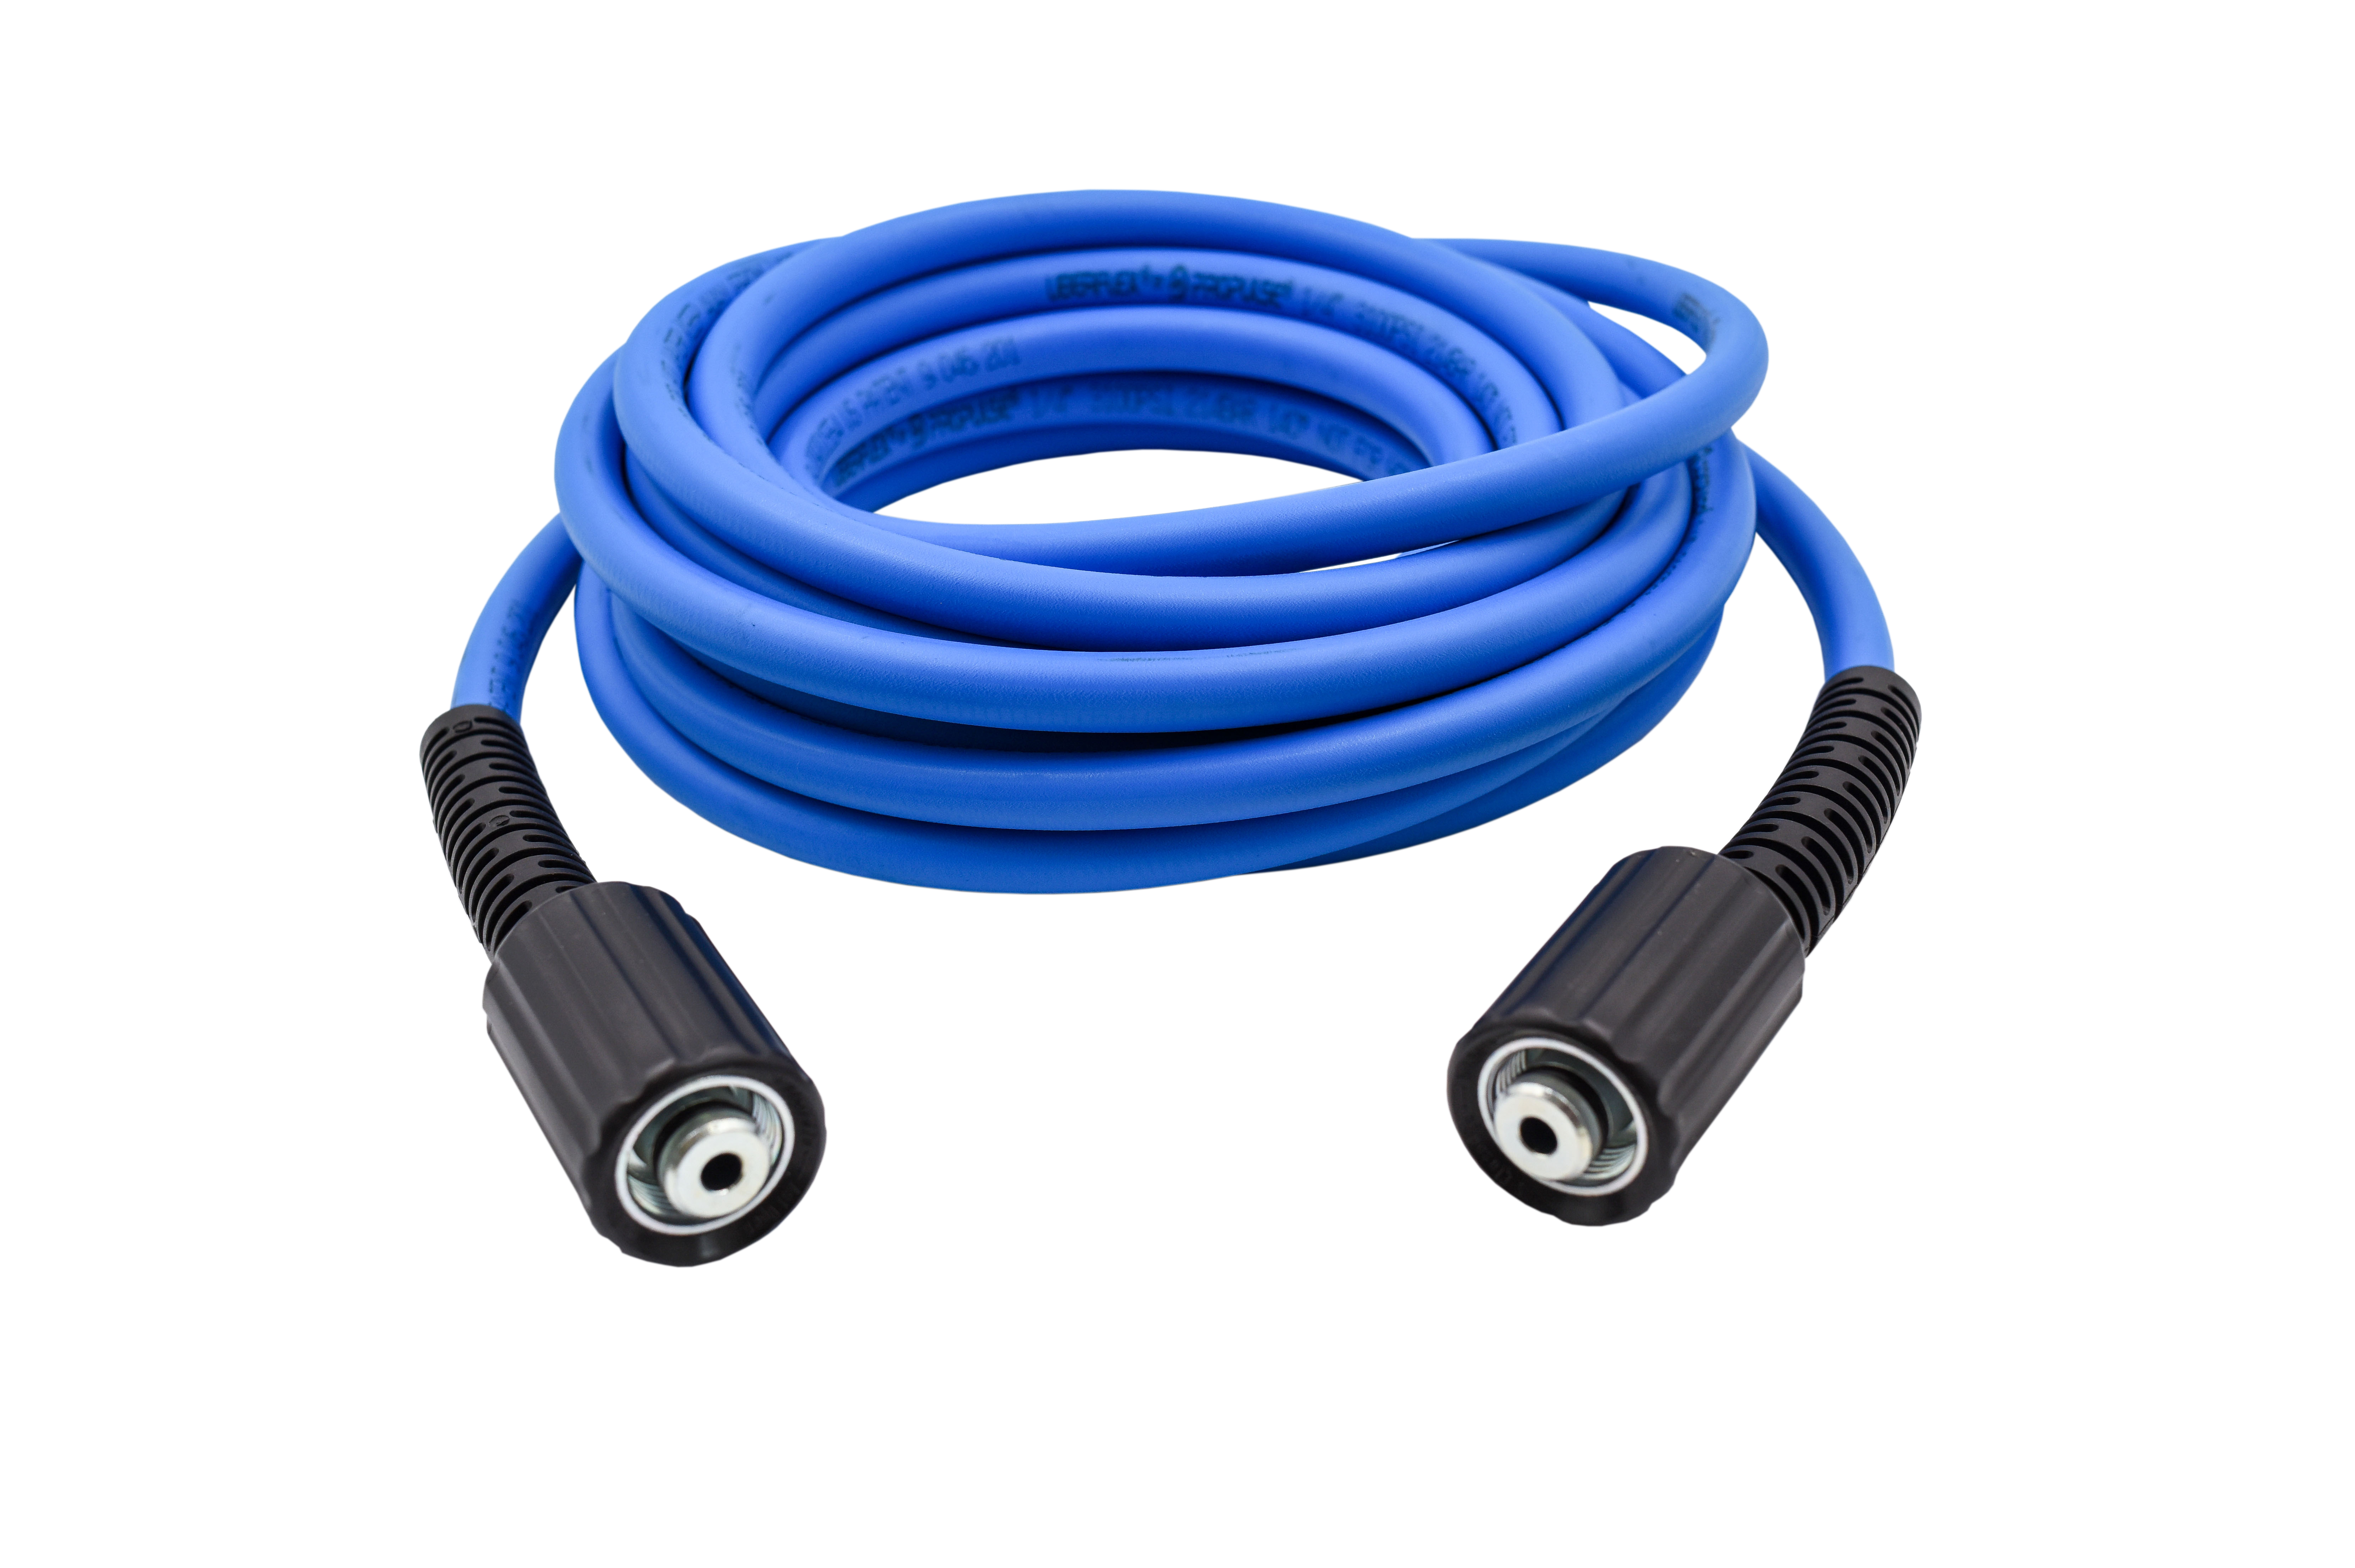 AR Blue Clean PW909UFH-BLUE, 25' Uber-Flex Pressure Washer Hose (1/4" x 25' Replacement/Extension Hose) Questions & Answers